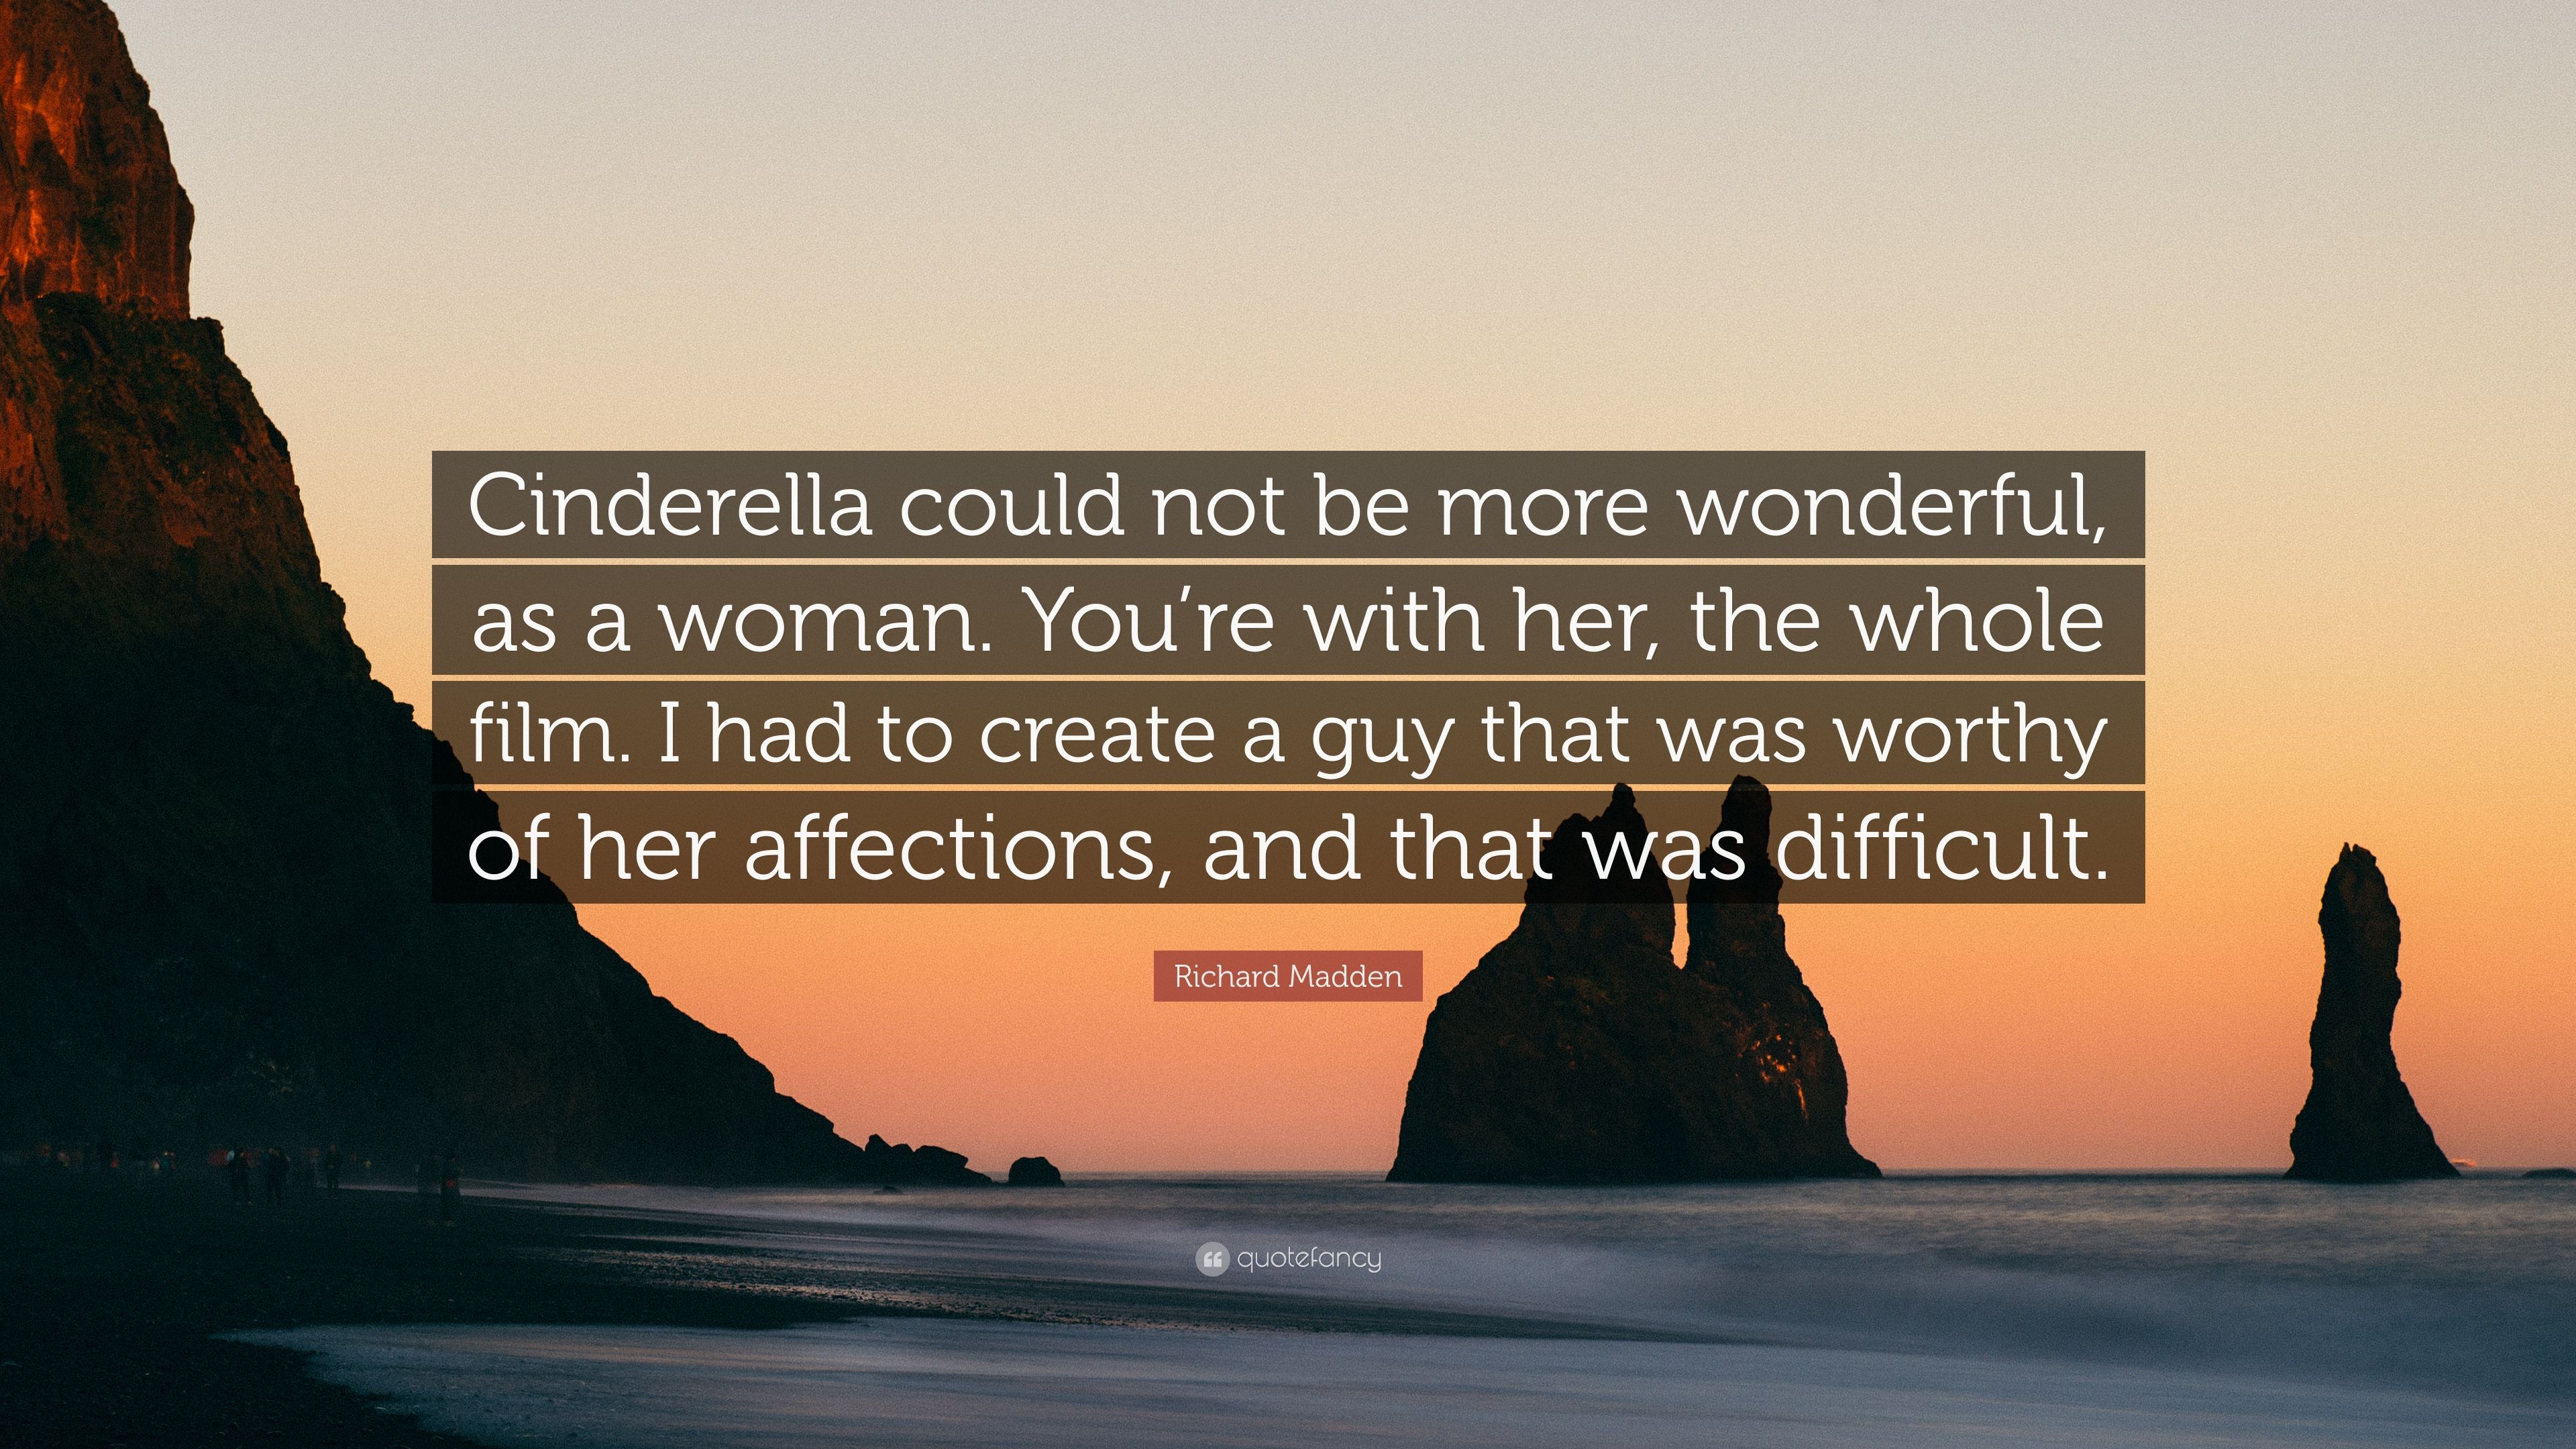 Richard Madden Quote: “Cinderella could not be more wonderful, as